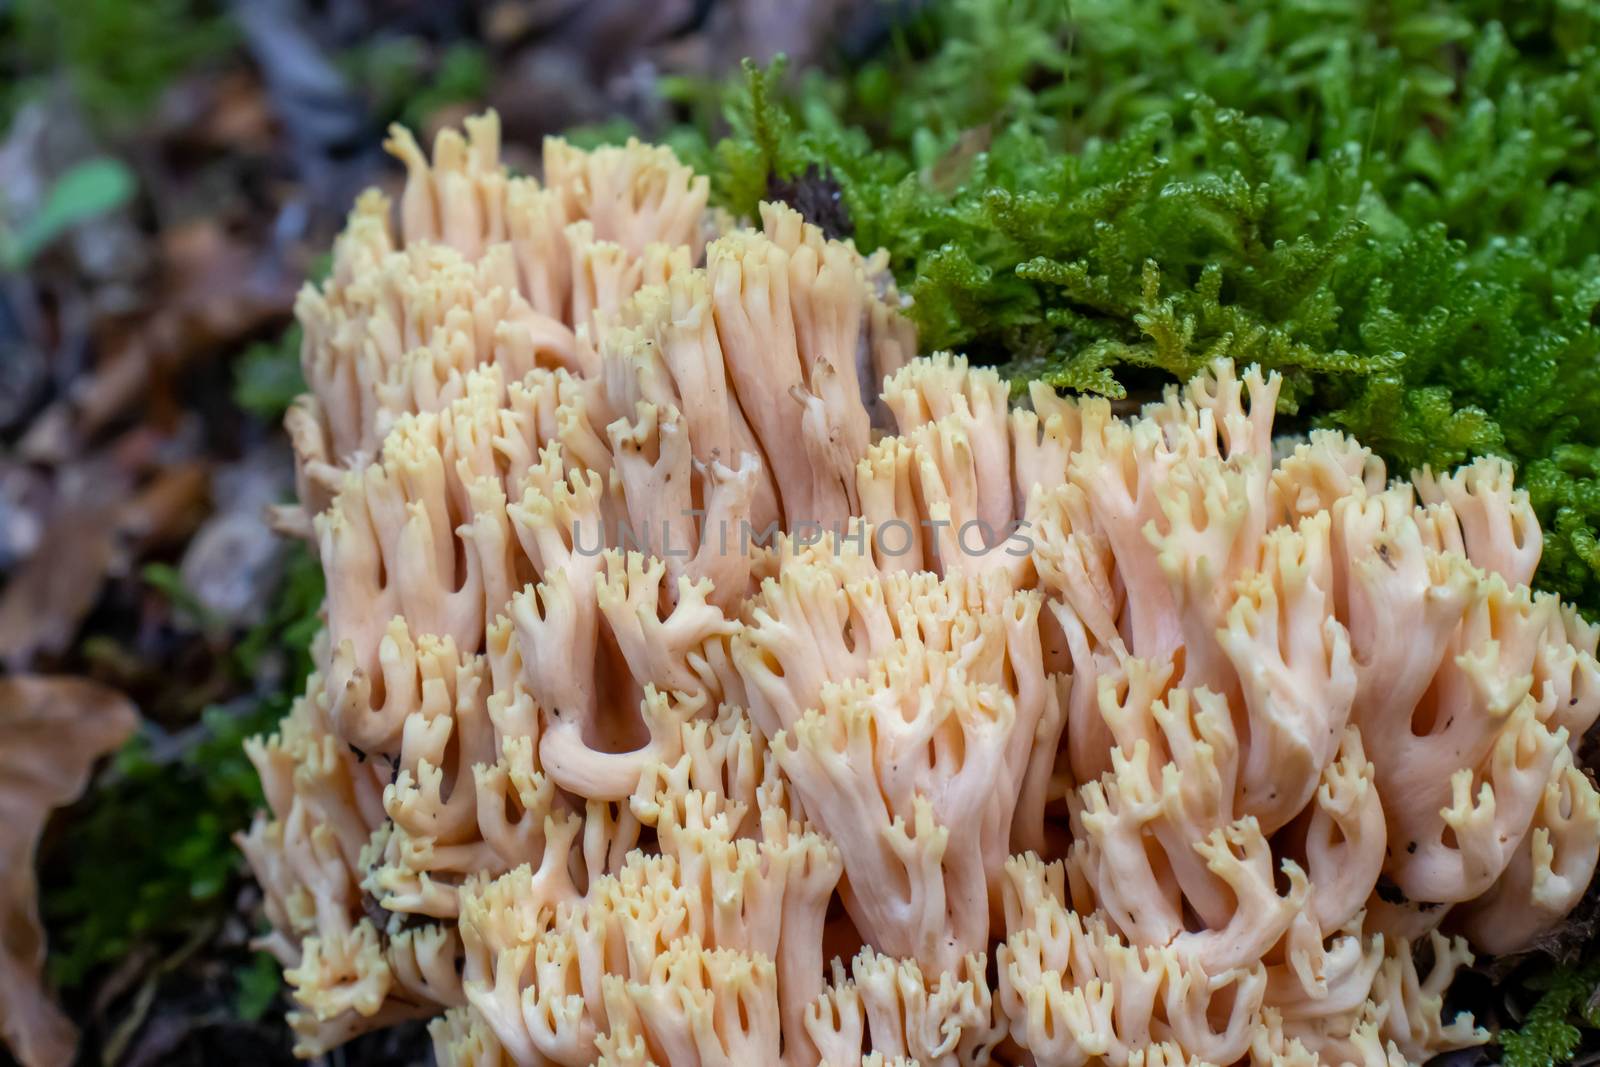 Ramaria pallida white mushroom in the forest coming out of the moss green background by Andreajk3